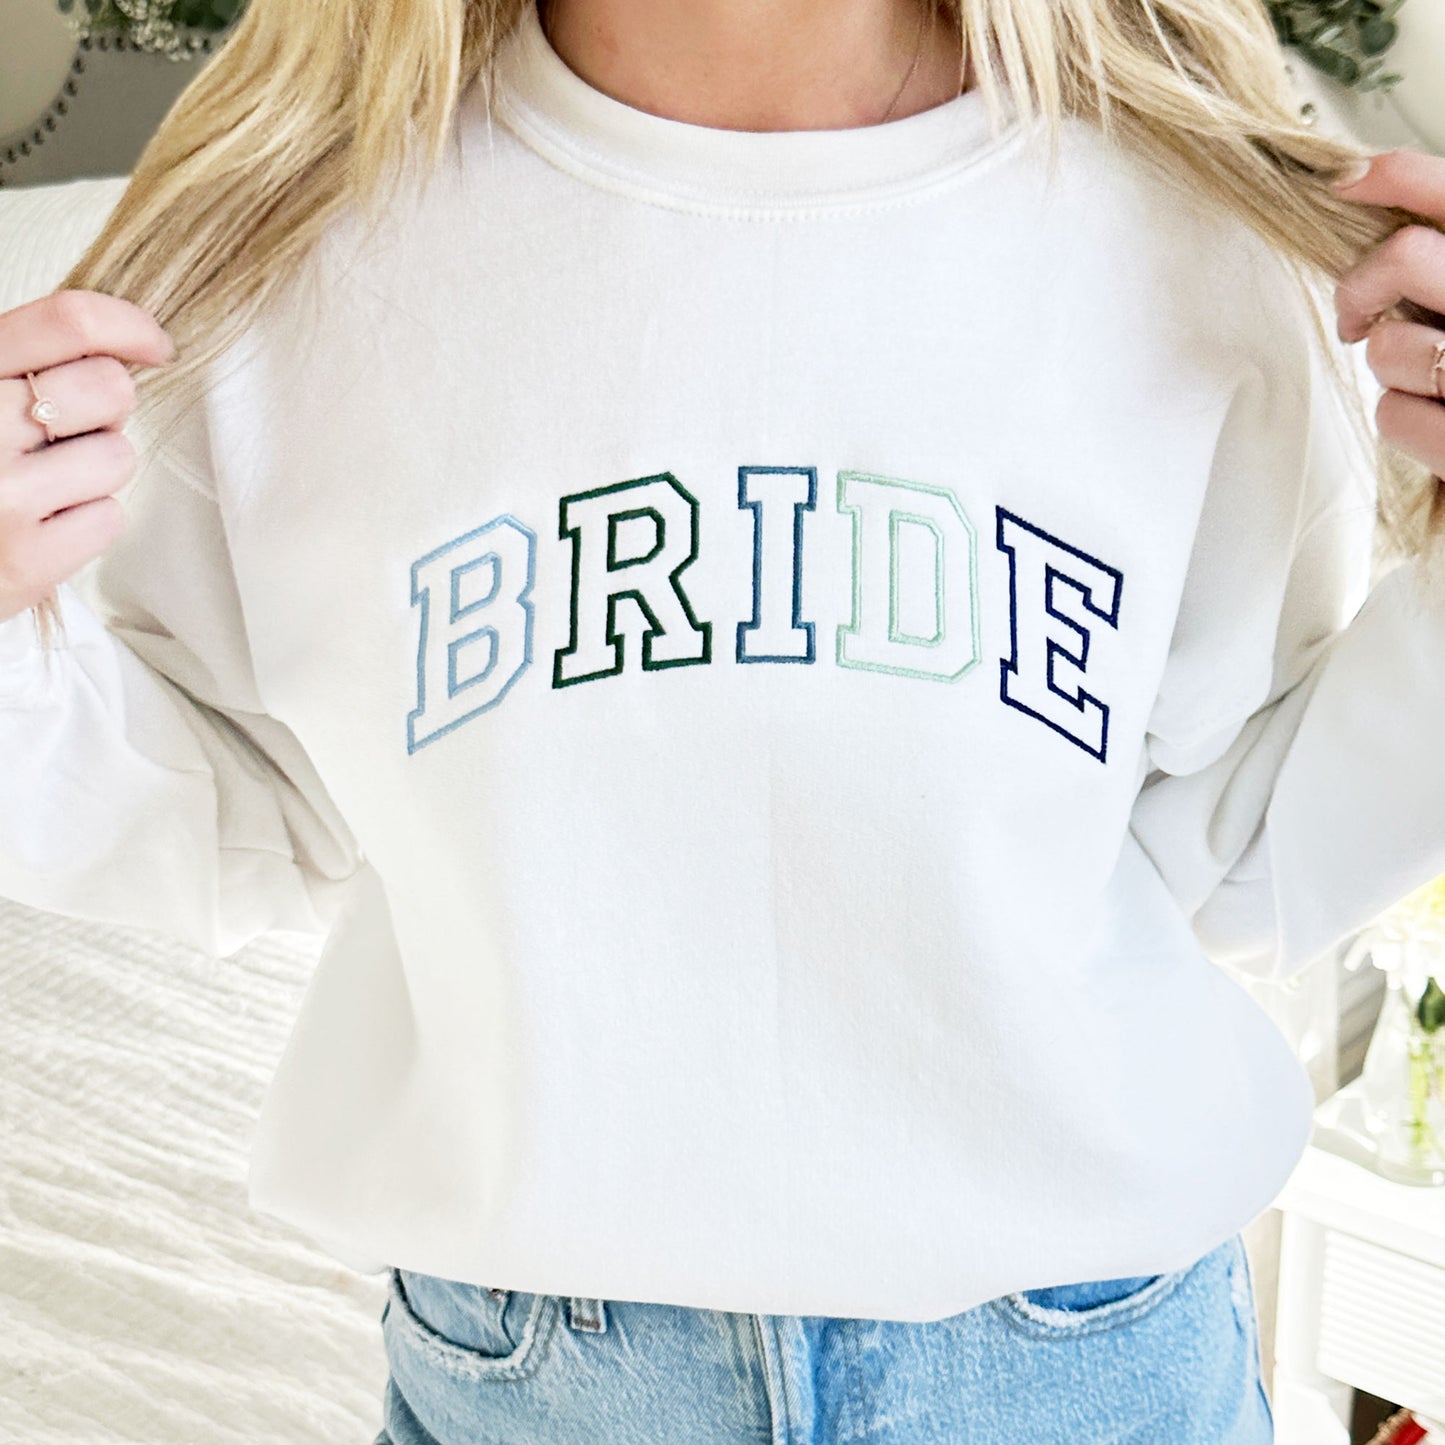 woman wearing a white crewneck sweatshirt with a custom large bride design embroidered in blue and green thread across the chest